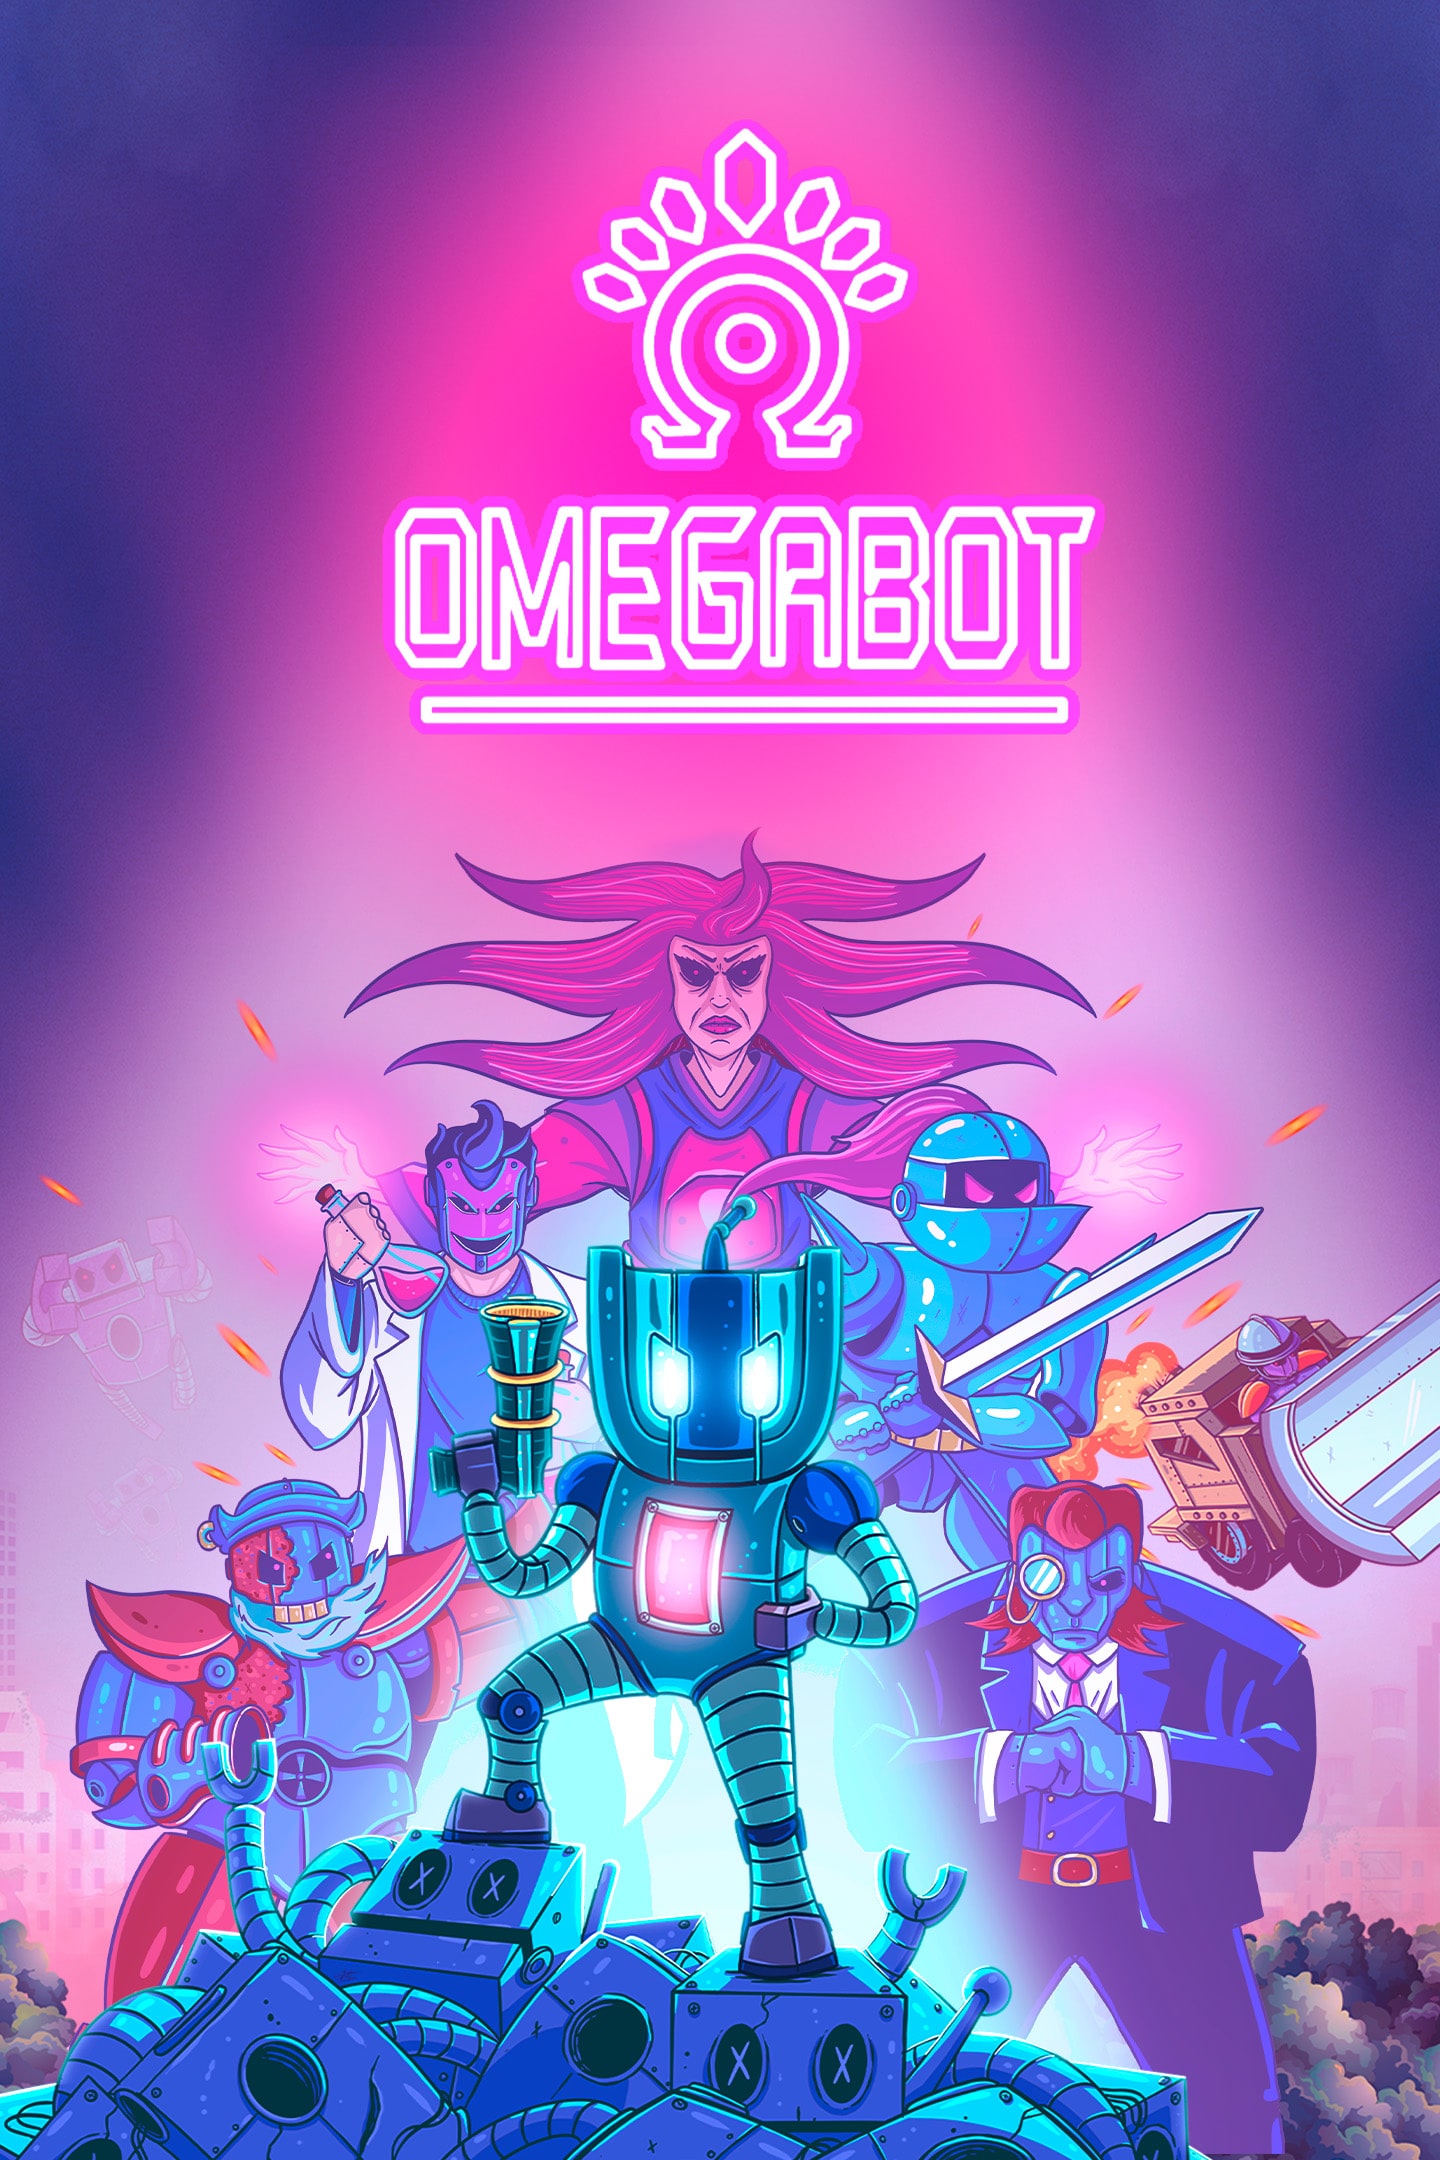 OmegaBot to deliver colorful side-scrolling action to PC and